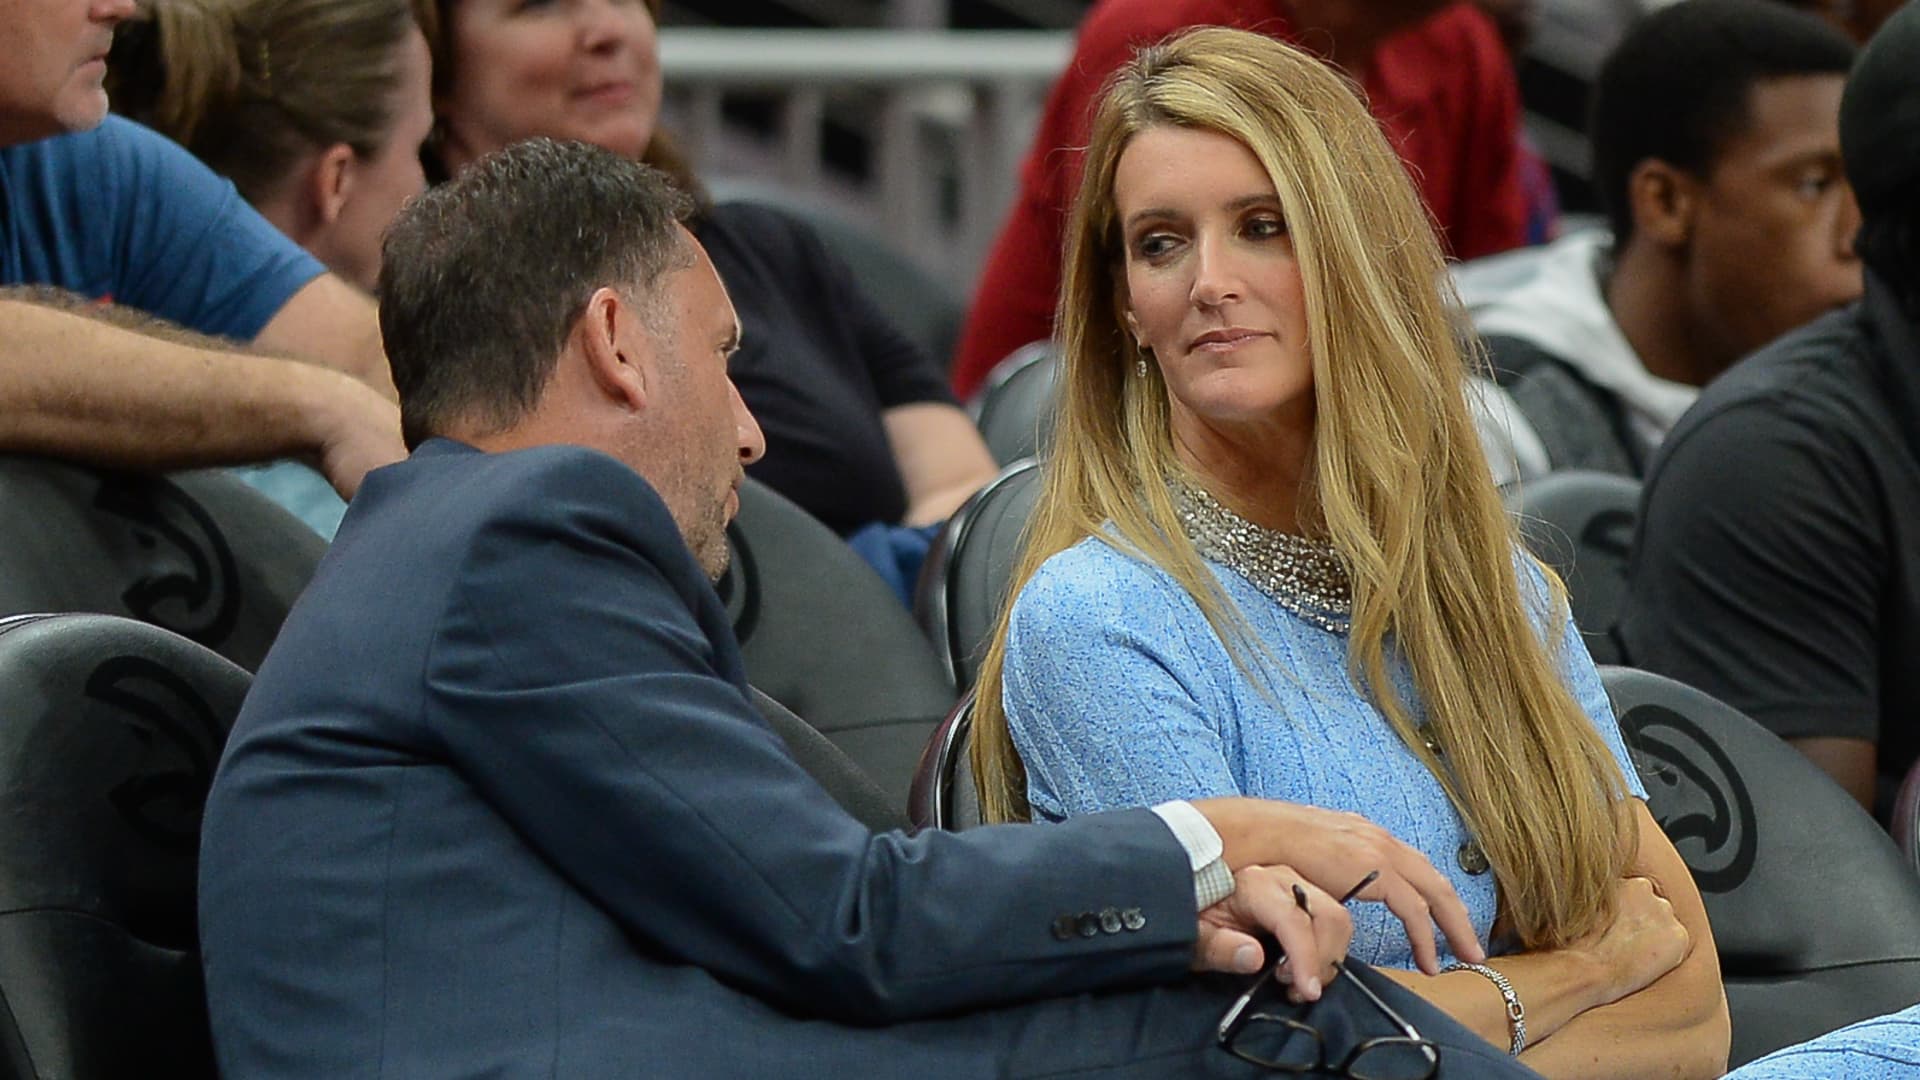 Atlanta owner Kelly Loeffler (right) talks with Dream General Manager Chris Sienko (left) during the WNBA game between the Las Vegas Aces and the Atlanta Dream on September 5th, 2019 at State Farm Arena in Atlanta, GA.